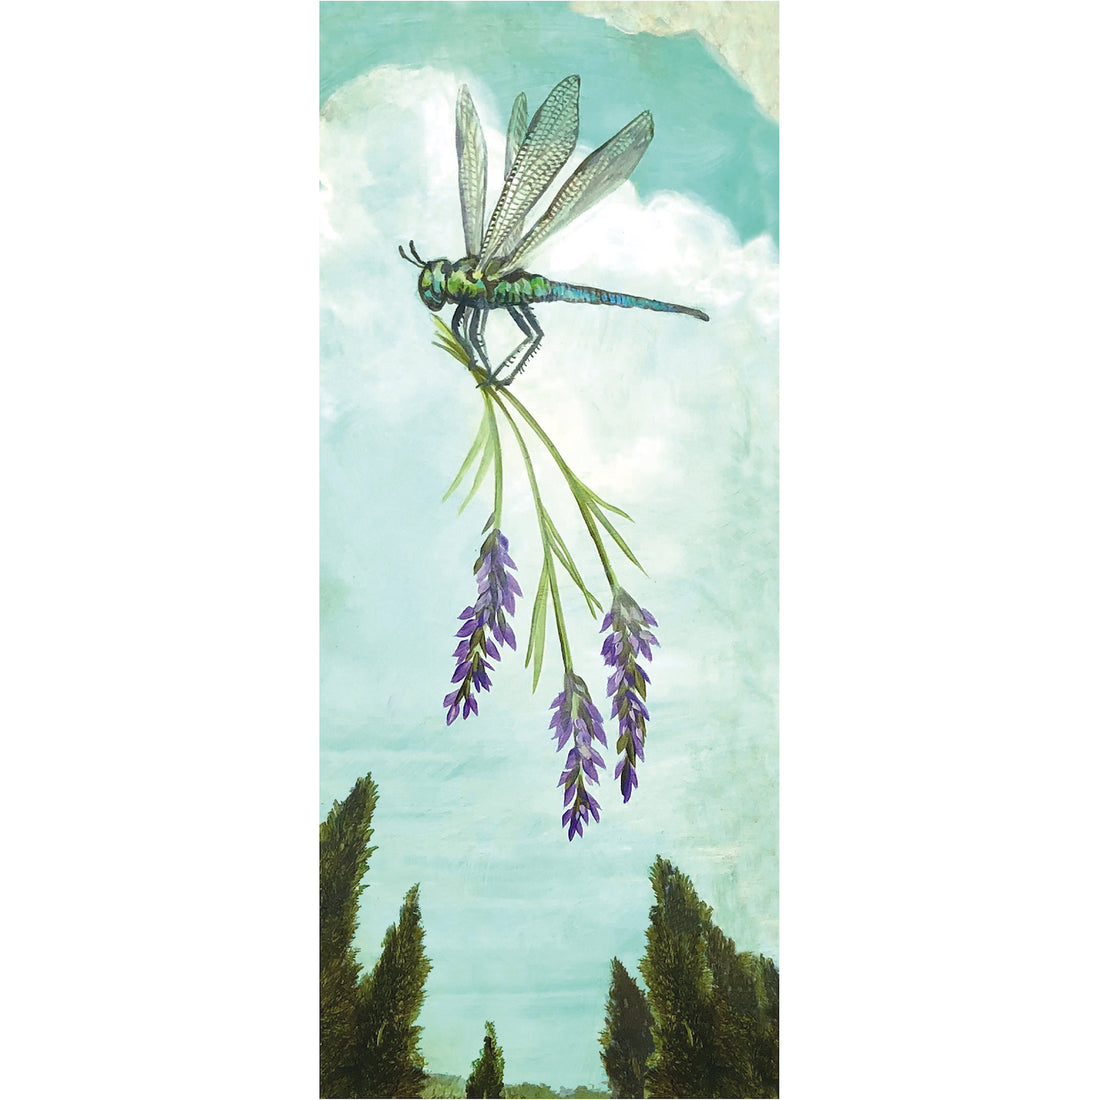 A whimsical illustration of a blue-green dragonfly carrying purple flowers by the stem through a cloudy blue sky over dark green trees.